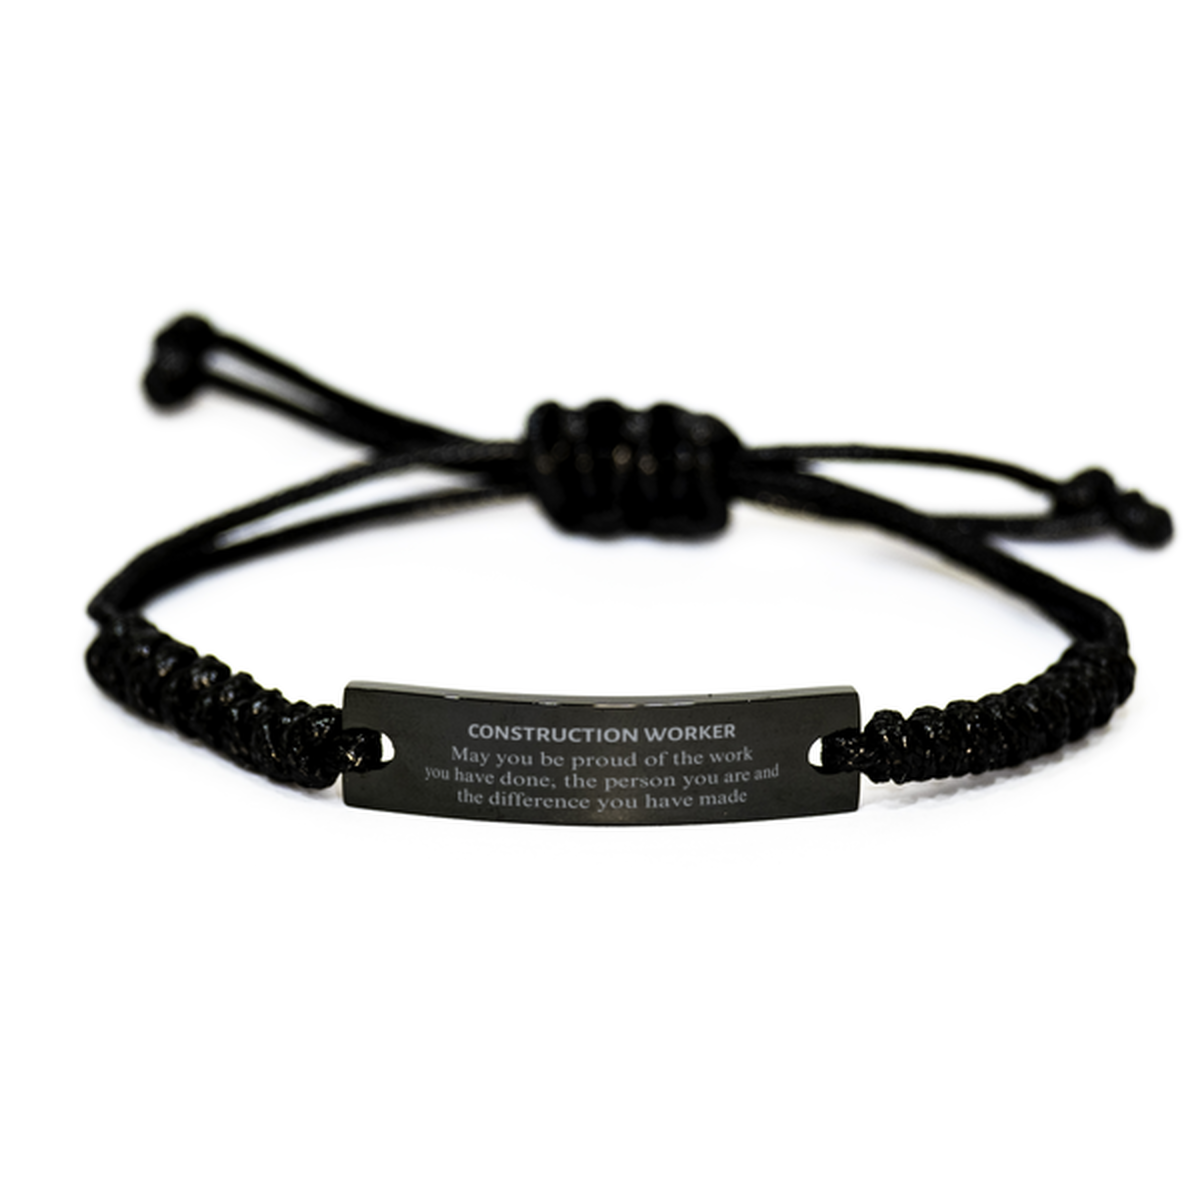 Construction Worker May you be proud of the work you have done, Retirement Construction Worker Black Rope Bracelet for Colleague Appreciation Gifts Amazing for Construction Worker